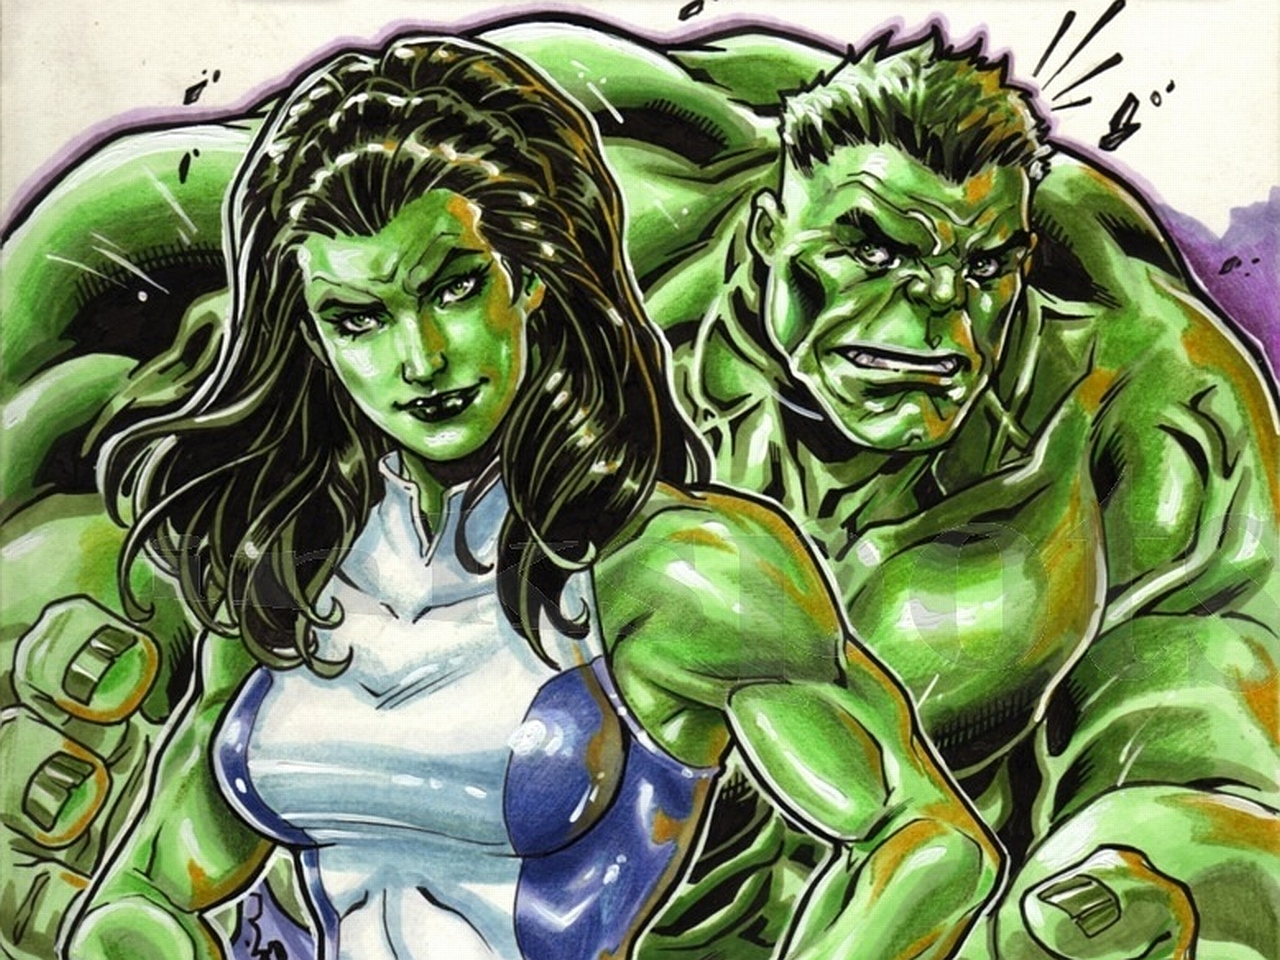 Free Download She Hulk And The Hulk Wallpaper 19015 Wallpaperesque [1280x960] For Your Desktop